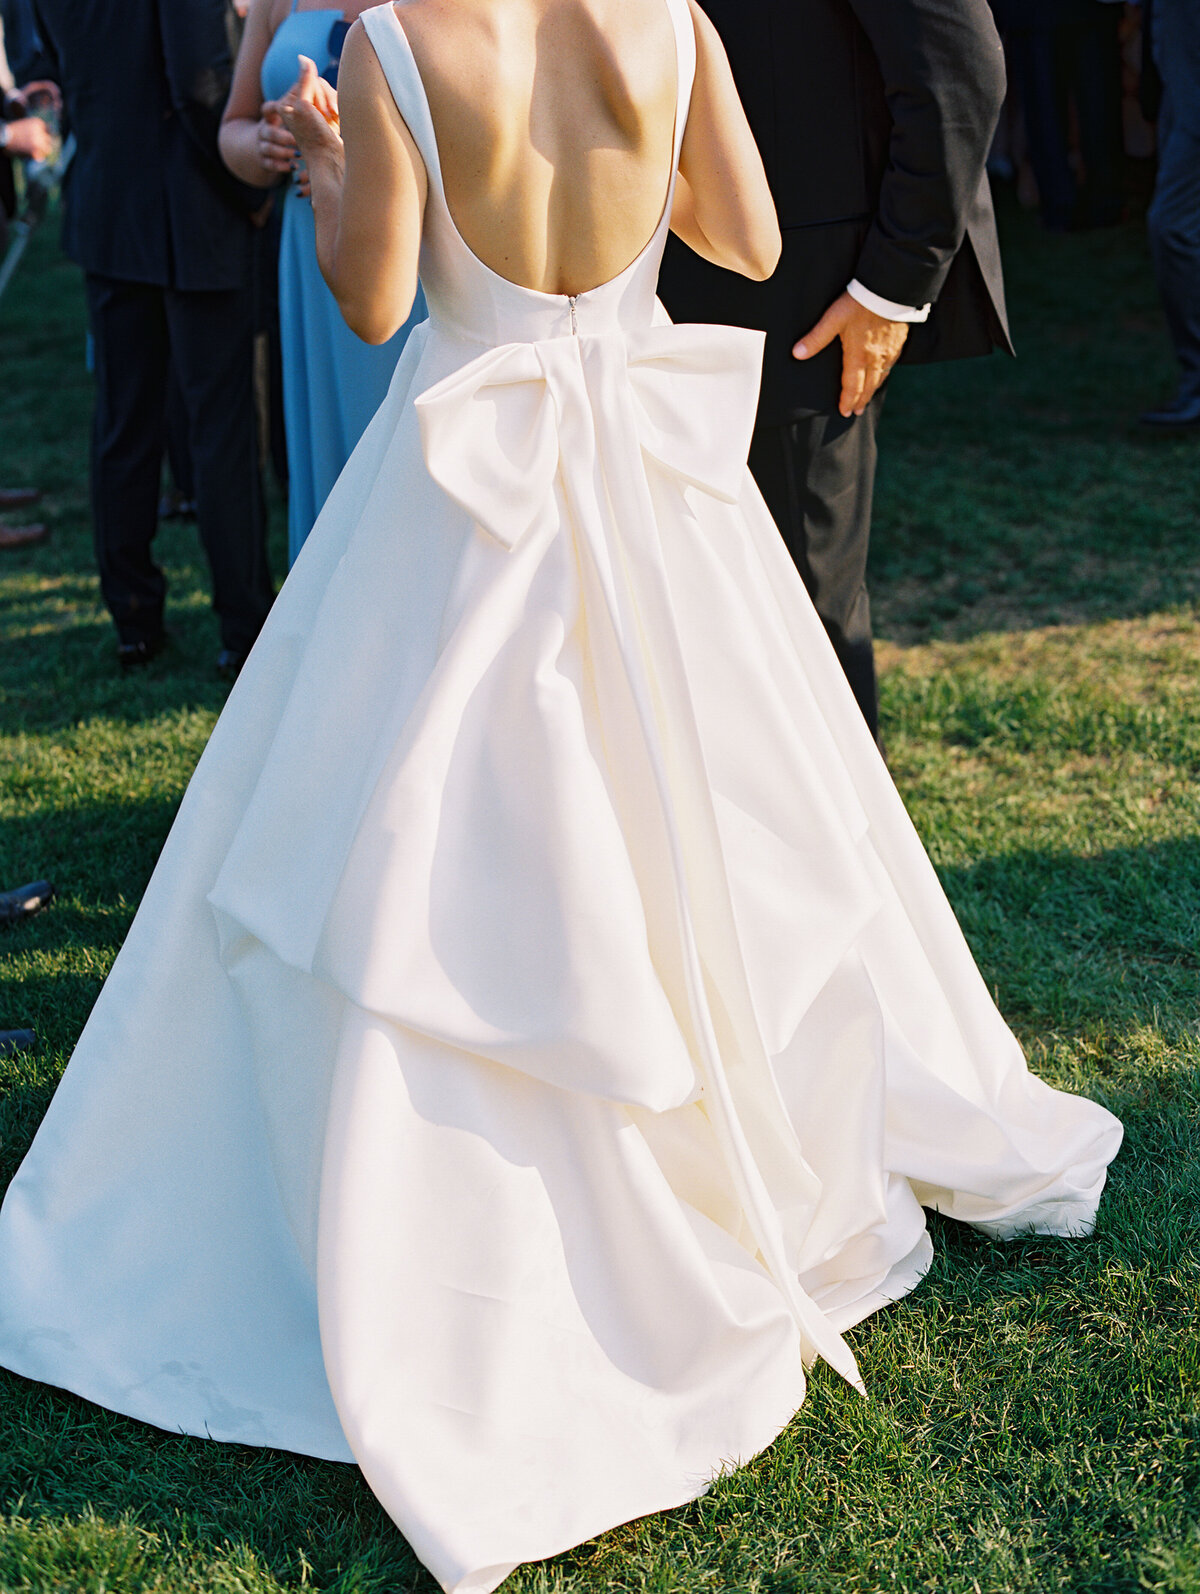 Classic satin wedding gown with scoop back, bateau neckline, and bow detail